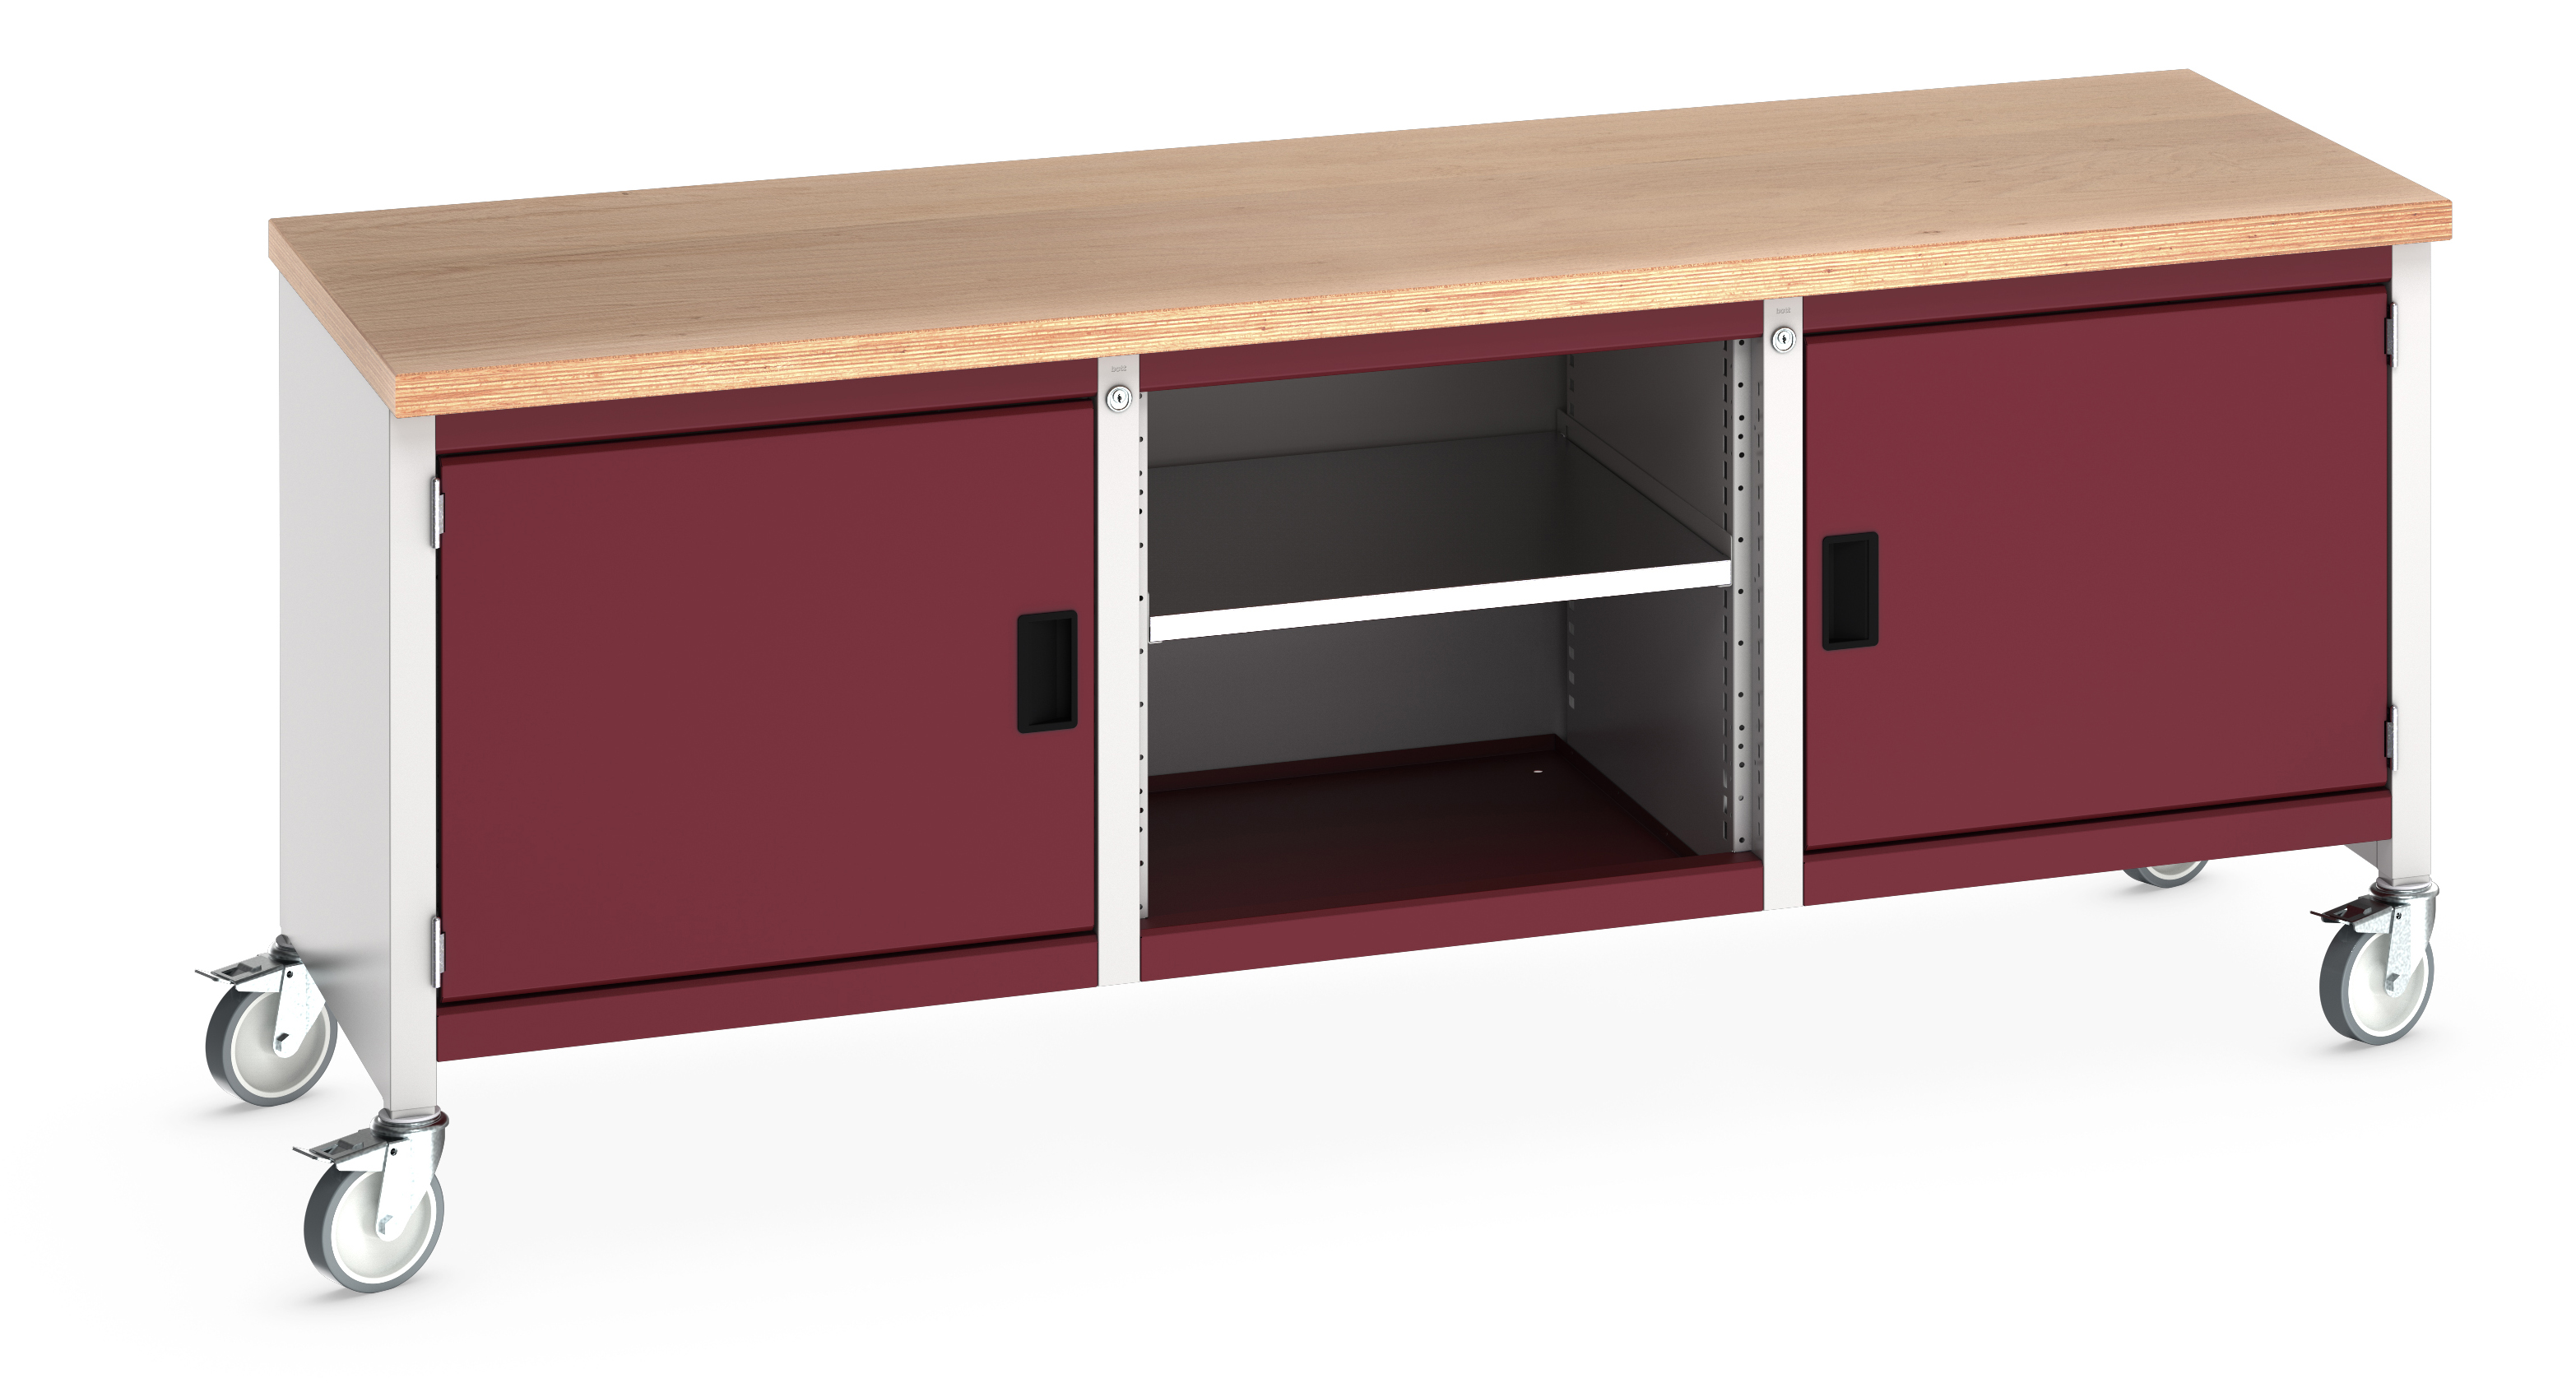 Bott Cubio Mobile Storage Bench With Full Cupboard / Open Cupboard /Full Cupboard - 41002118.24V